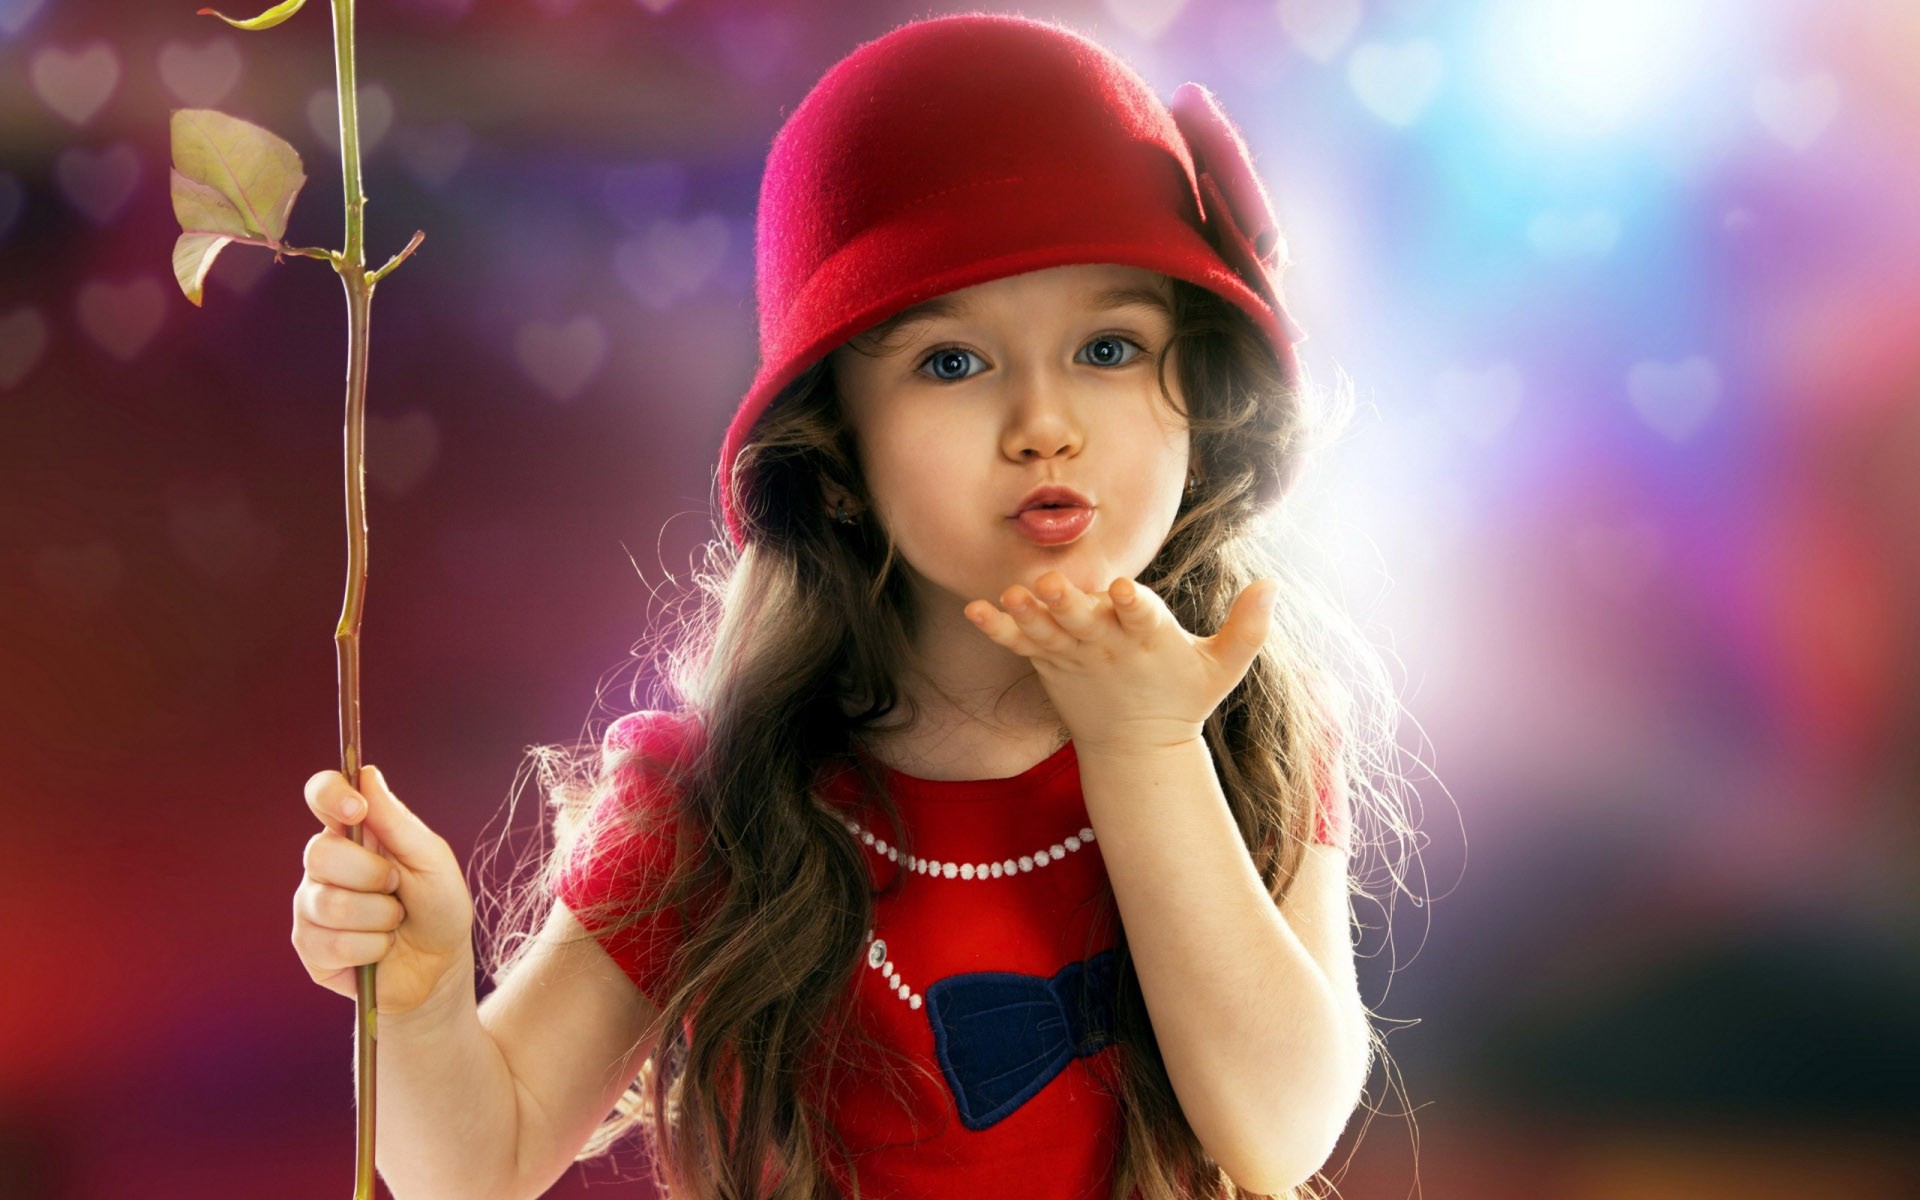 pictures of cute babies hd wallpaper